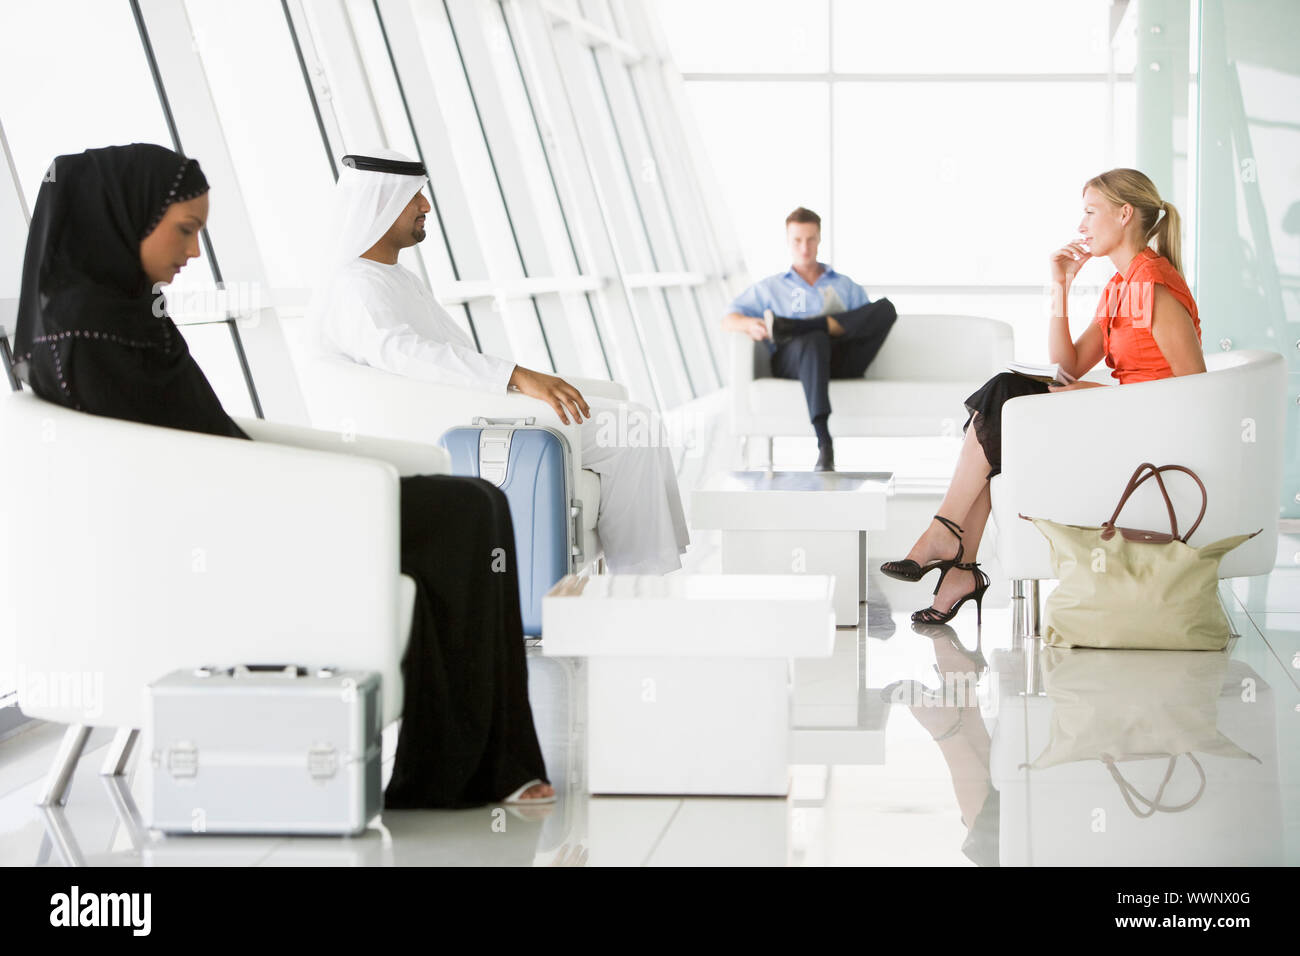 Passengers waiting in airport departure lounge Stock Photo